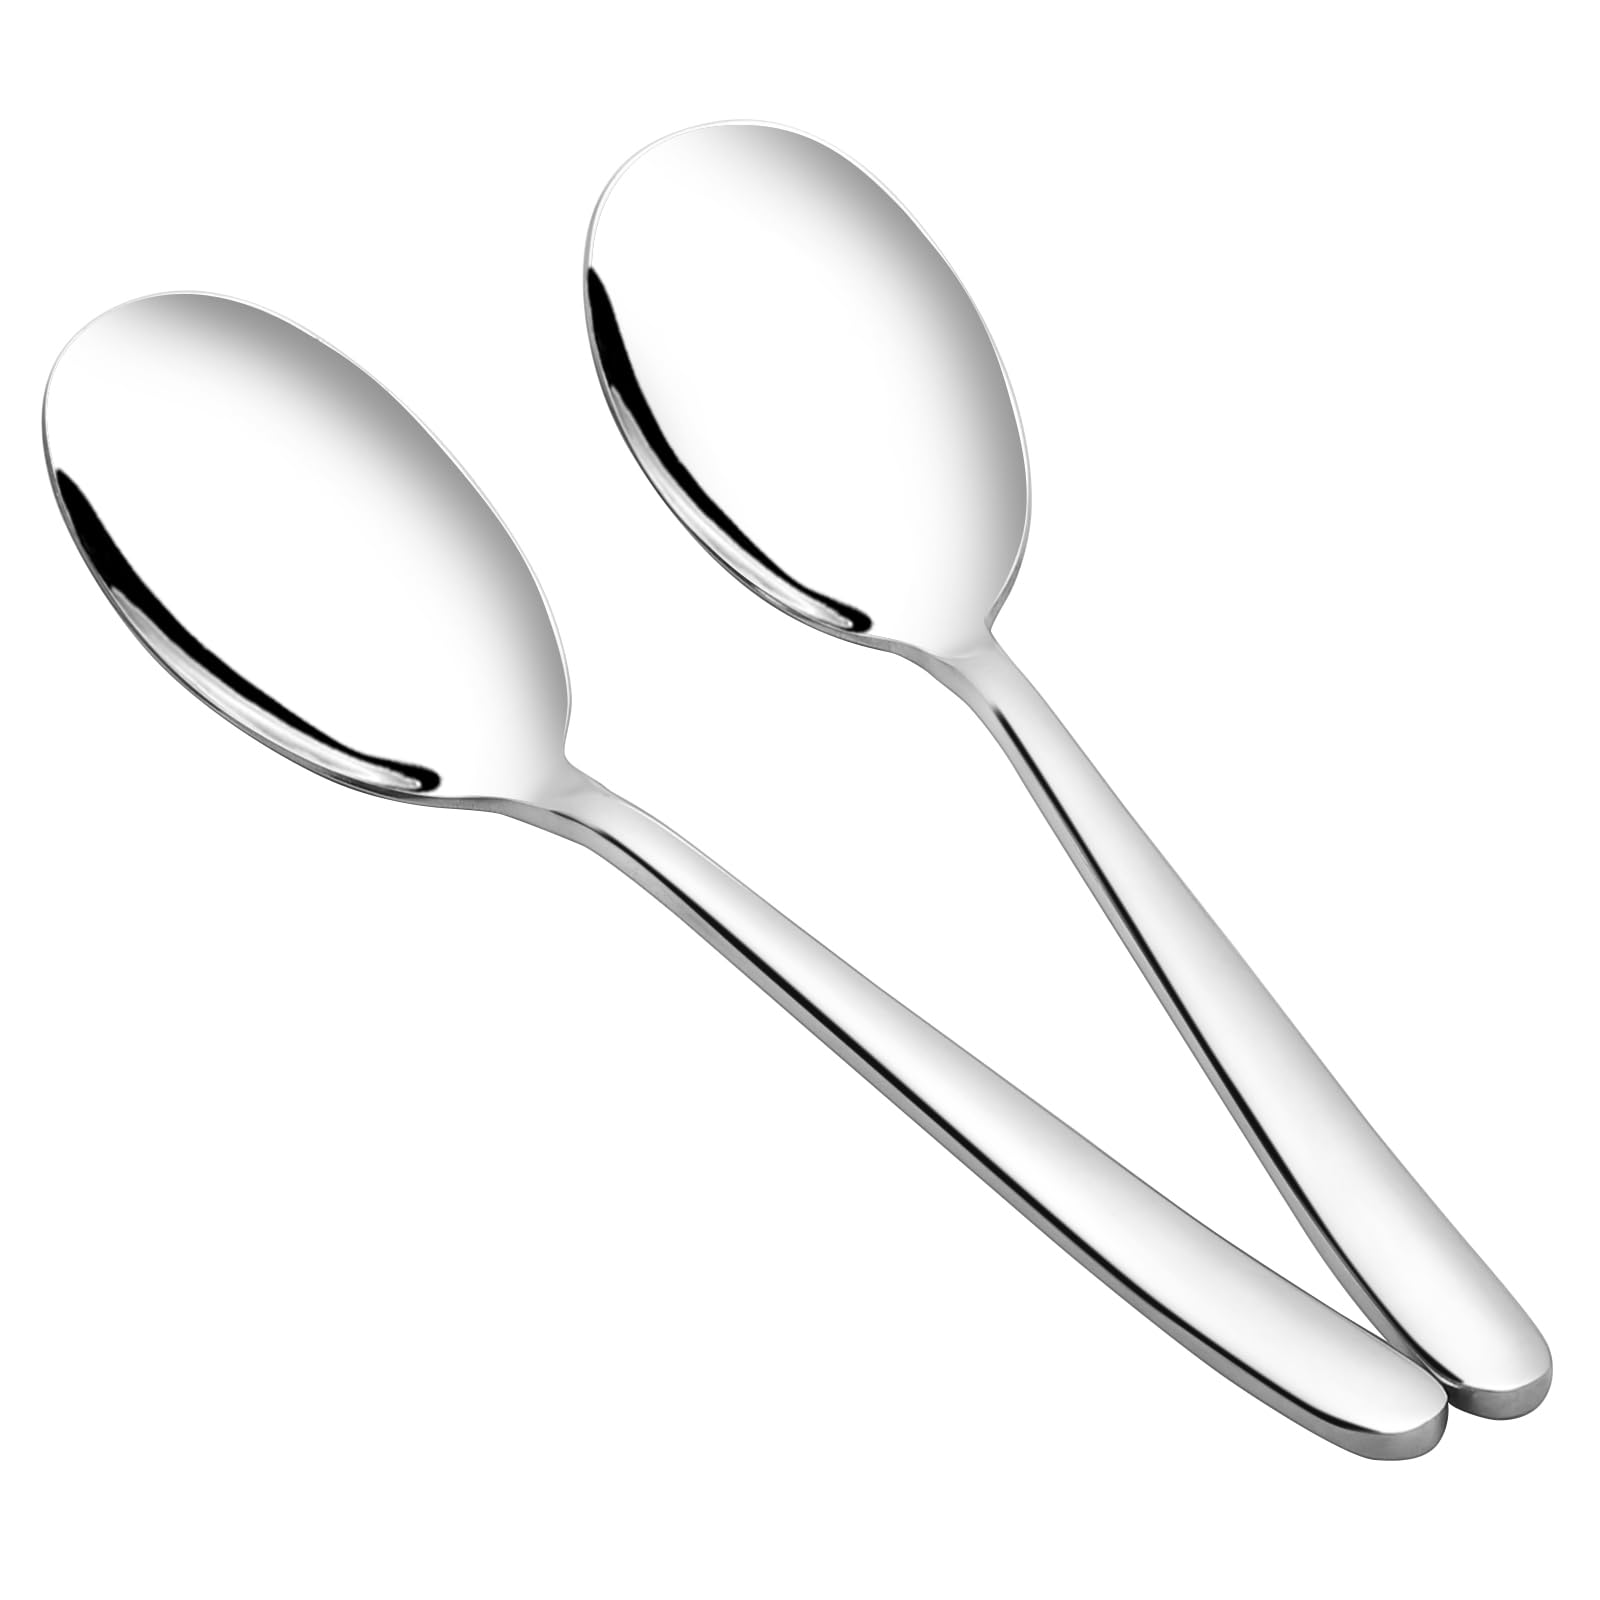 Nicesh 8-Piece Stainless Steel Large Buffet Serving Spoon, Large Kitchen Spoon